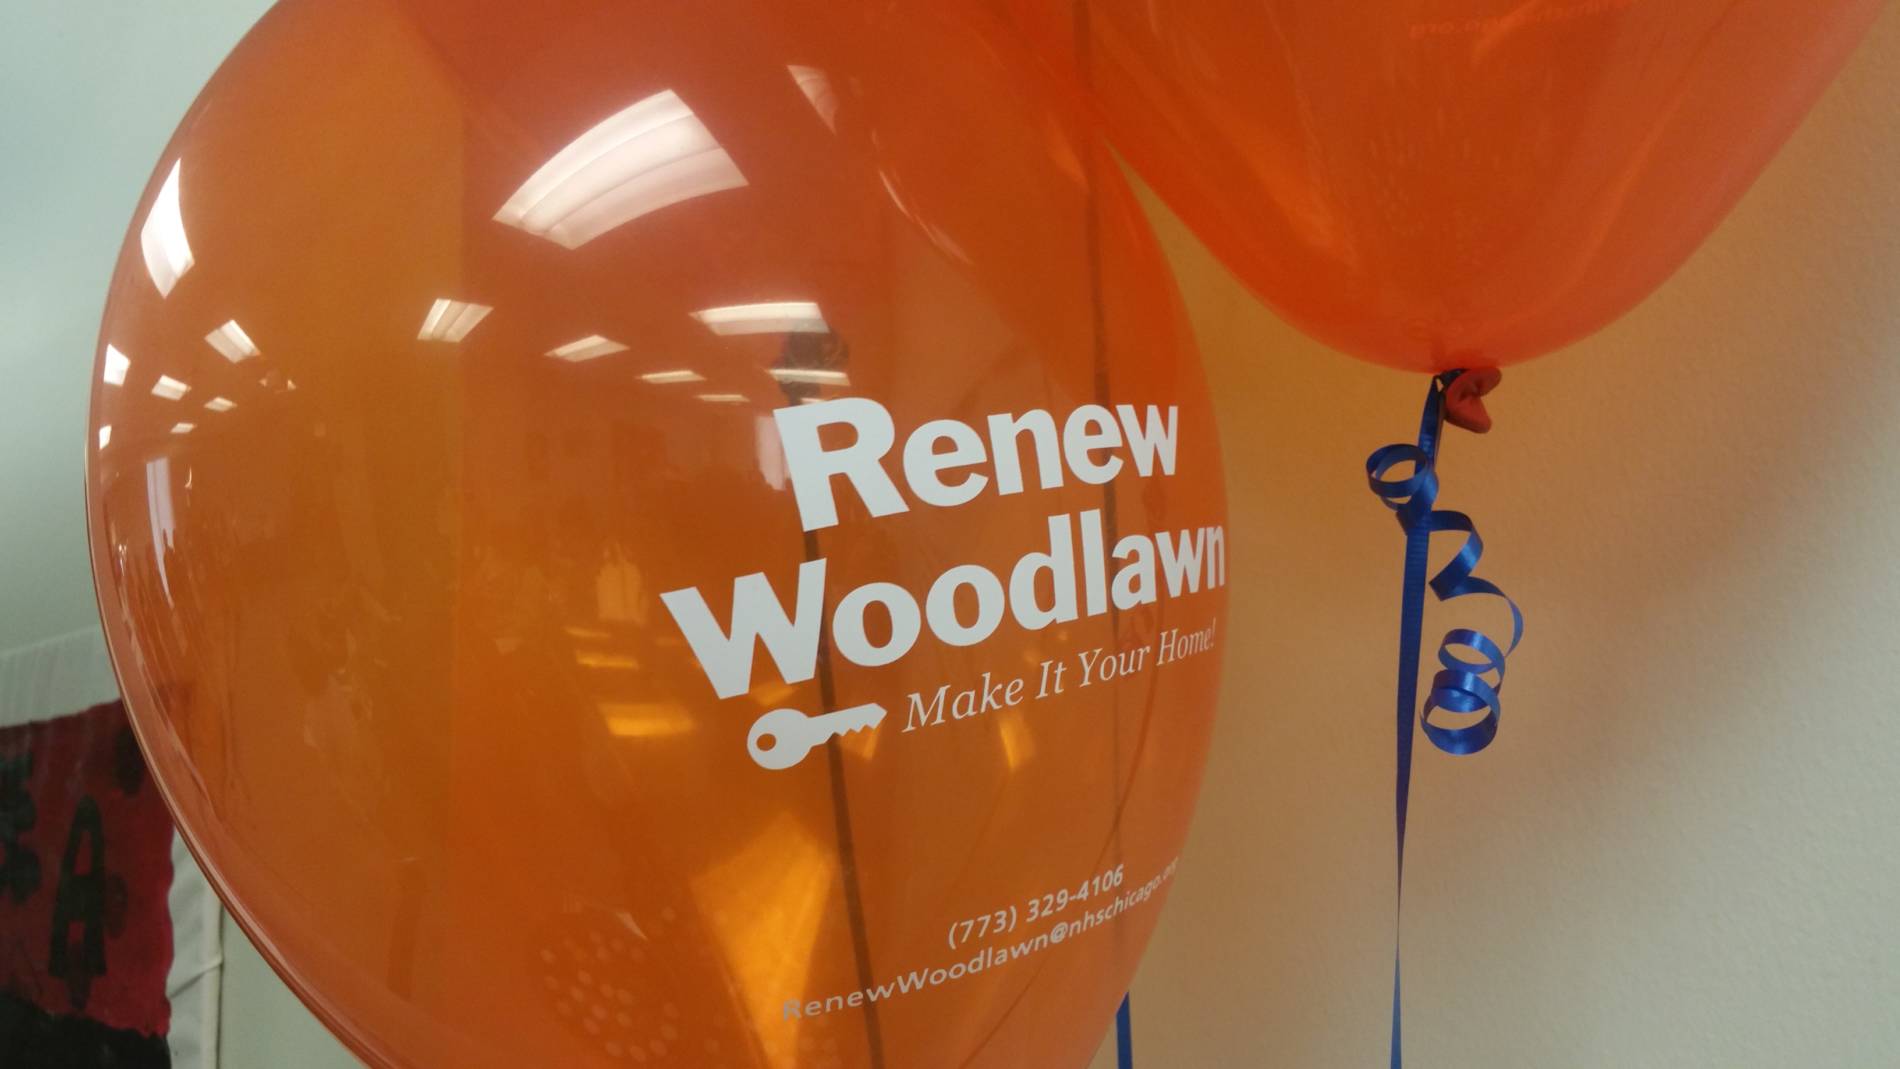 Renew Woodlawn Attracts New Homeowners to Community